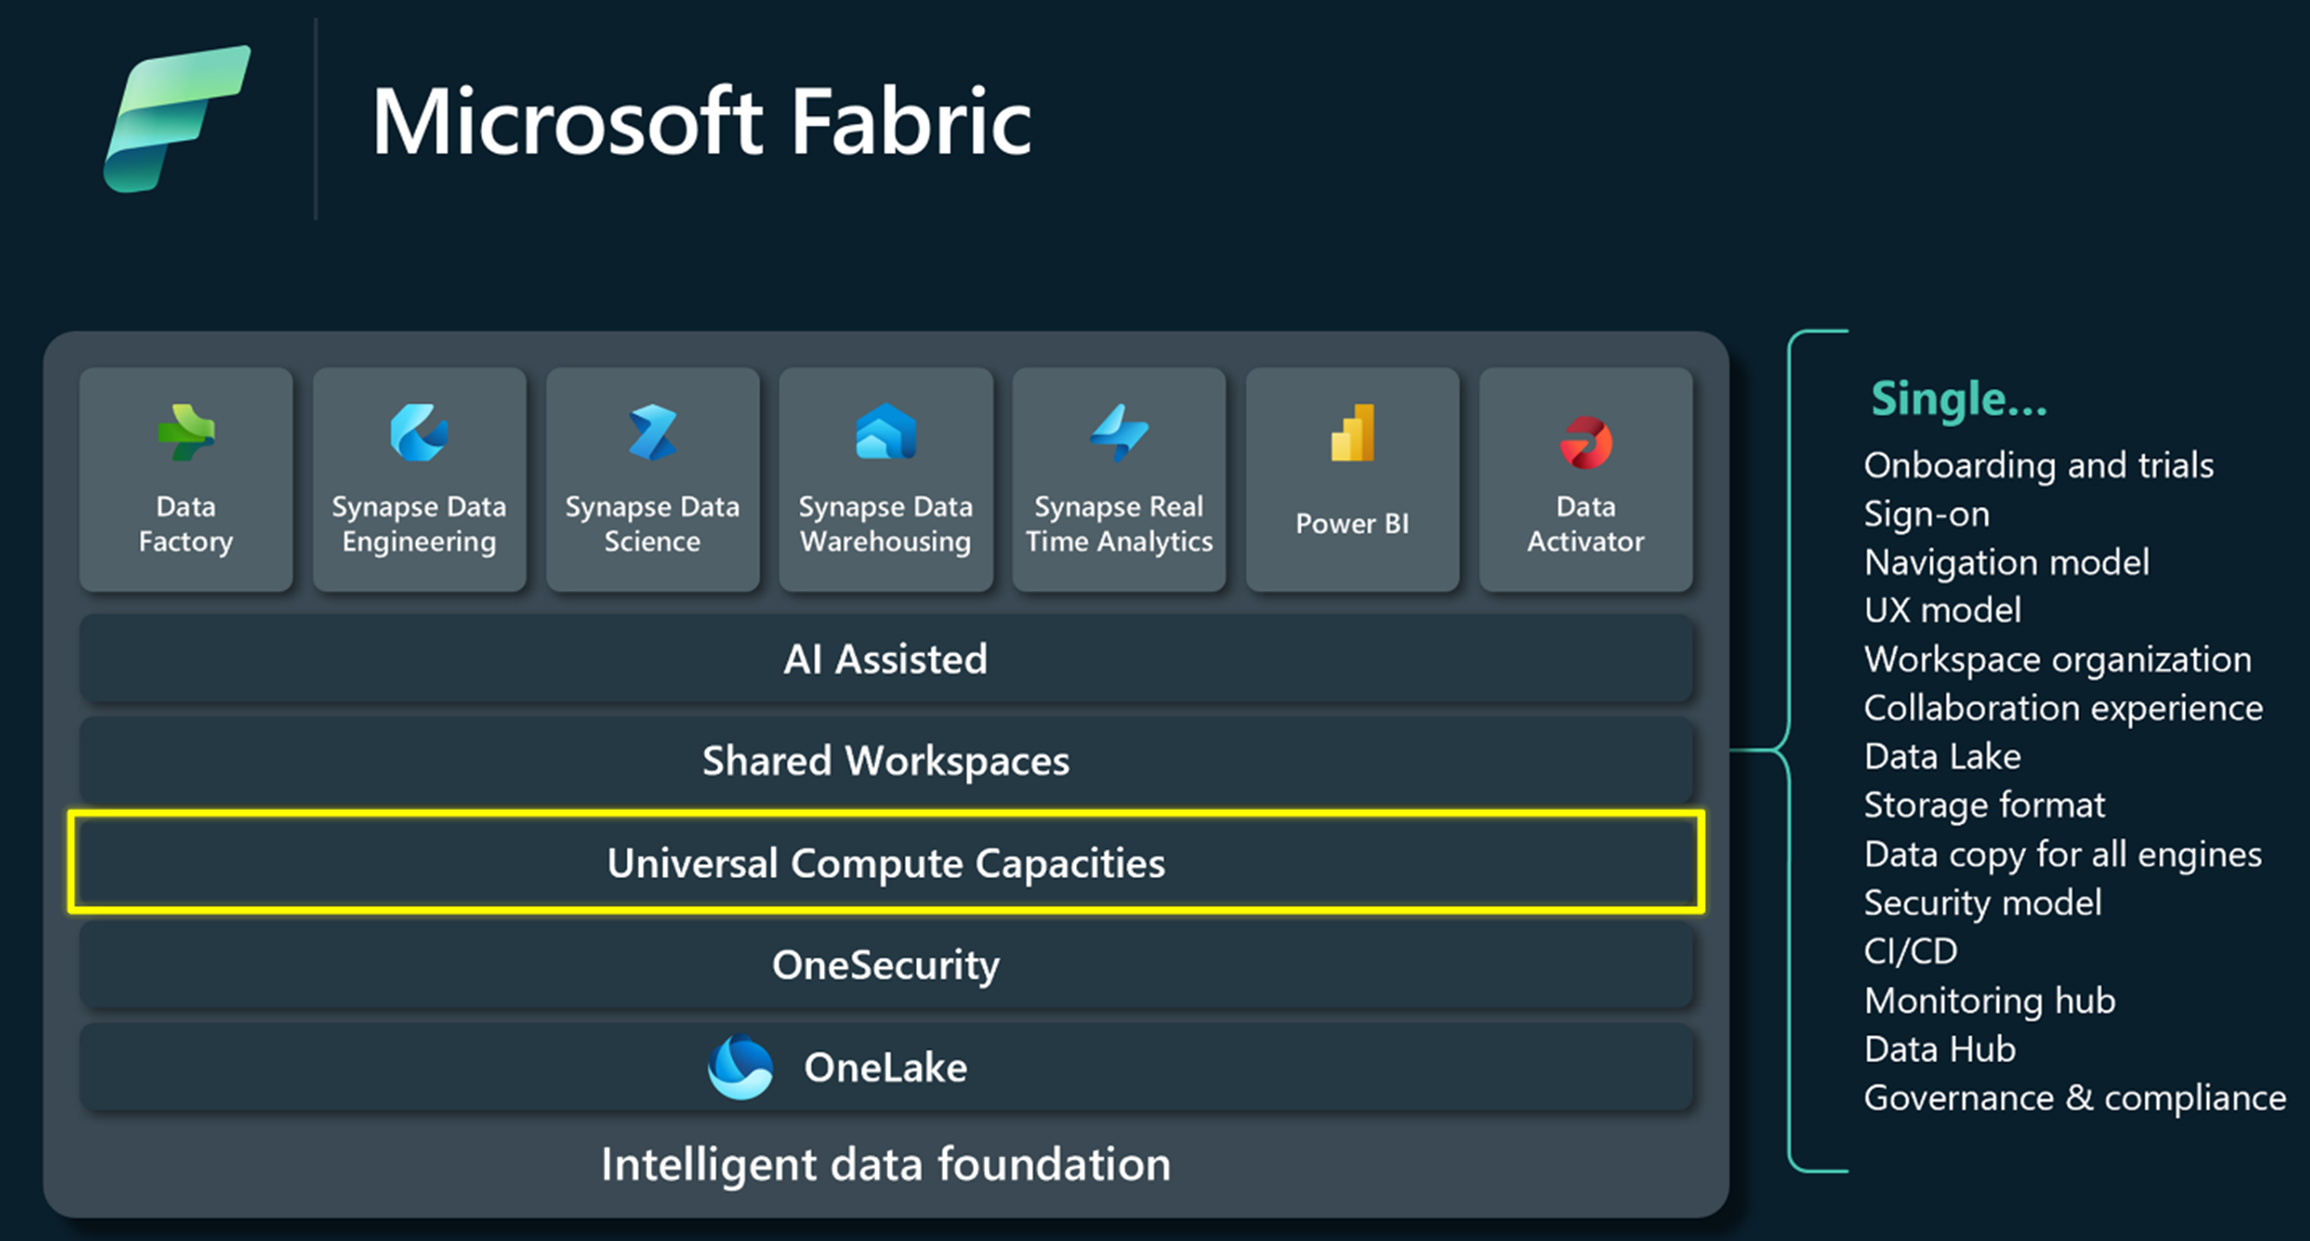 A diagram showing an overview of Microsoft Fabric, highlighting the Universal Compute Capacities and key features.